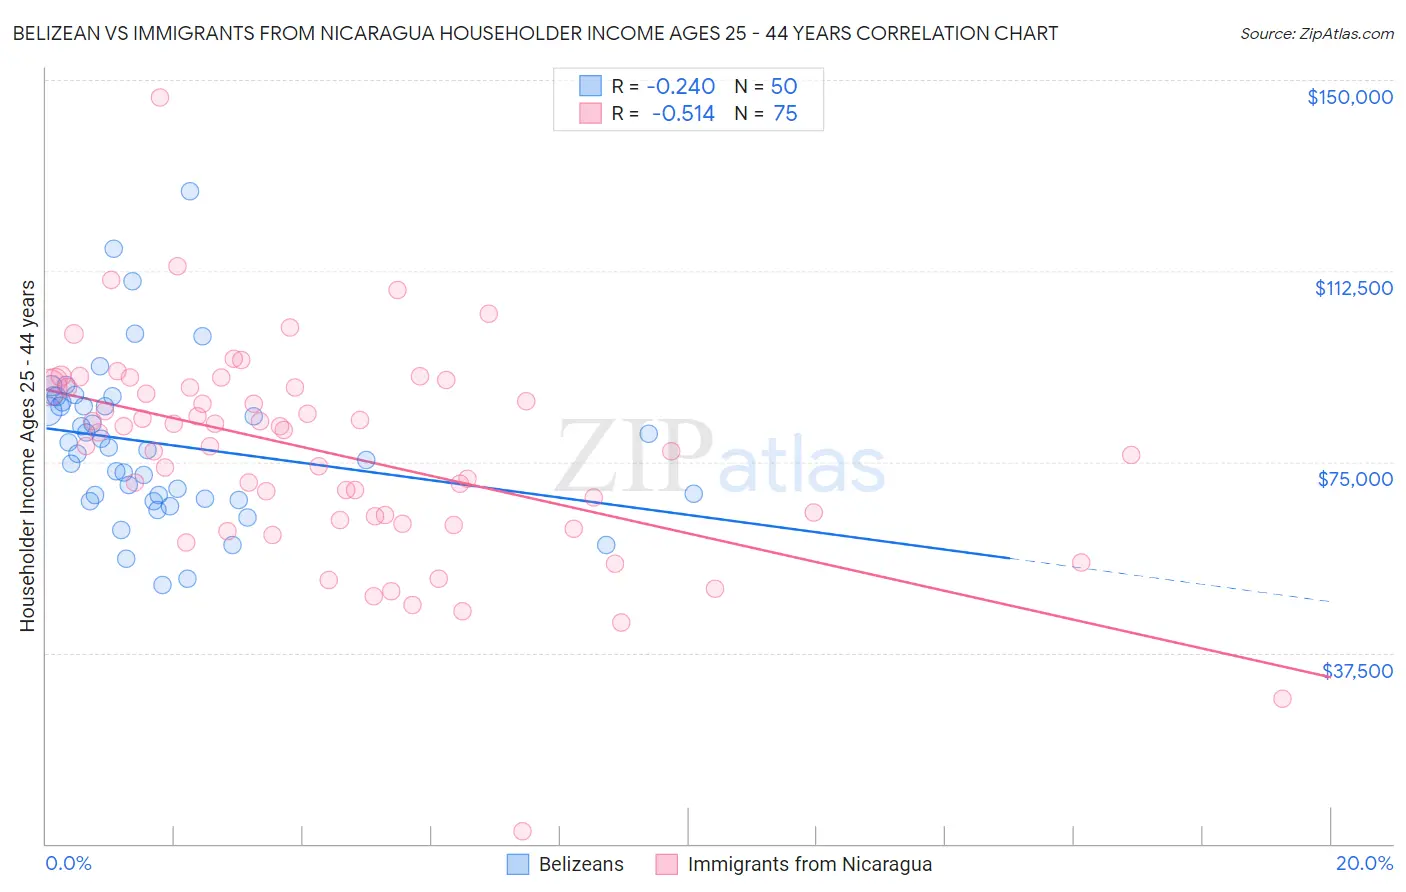 Belizean vs Immigrants from Nicaragua Householder Income Ages 25 - 44 years